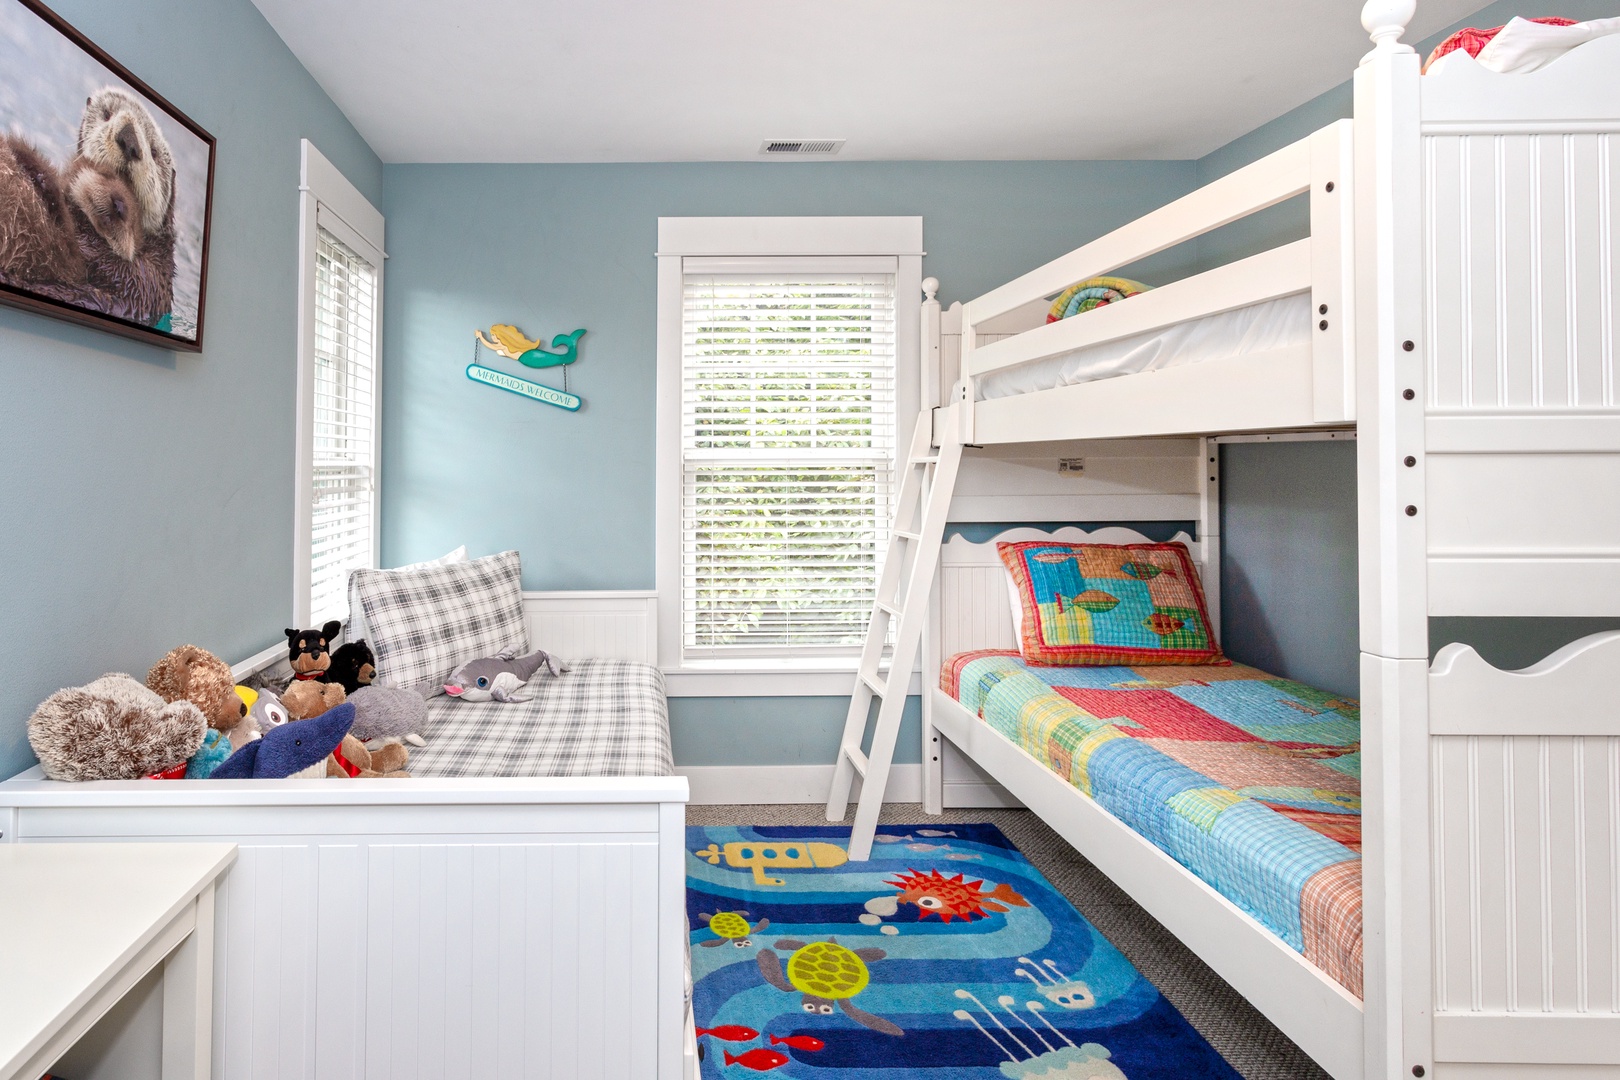 Second floor bunk room with trundle